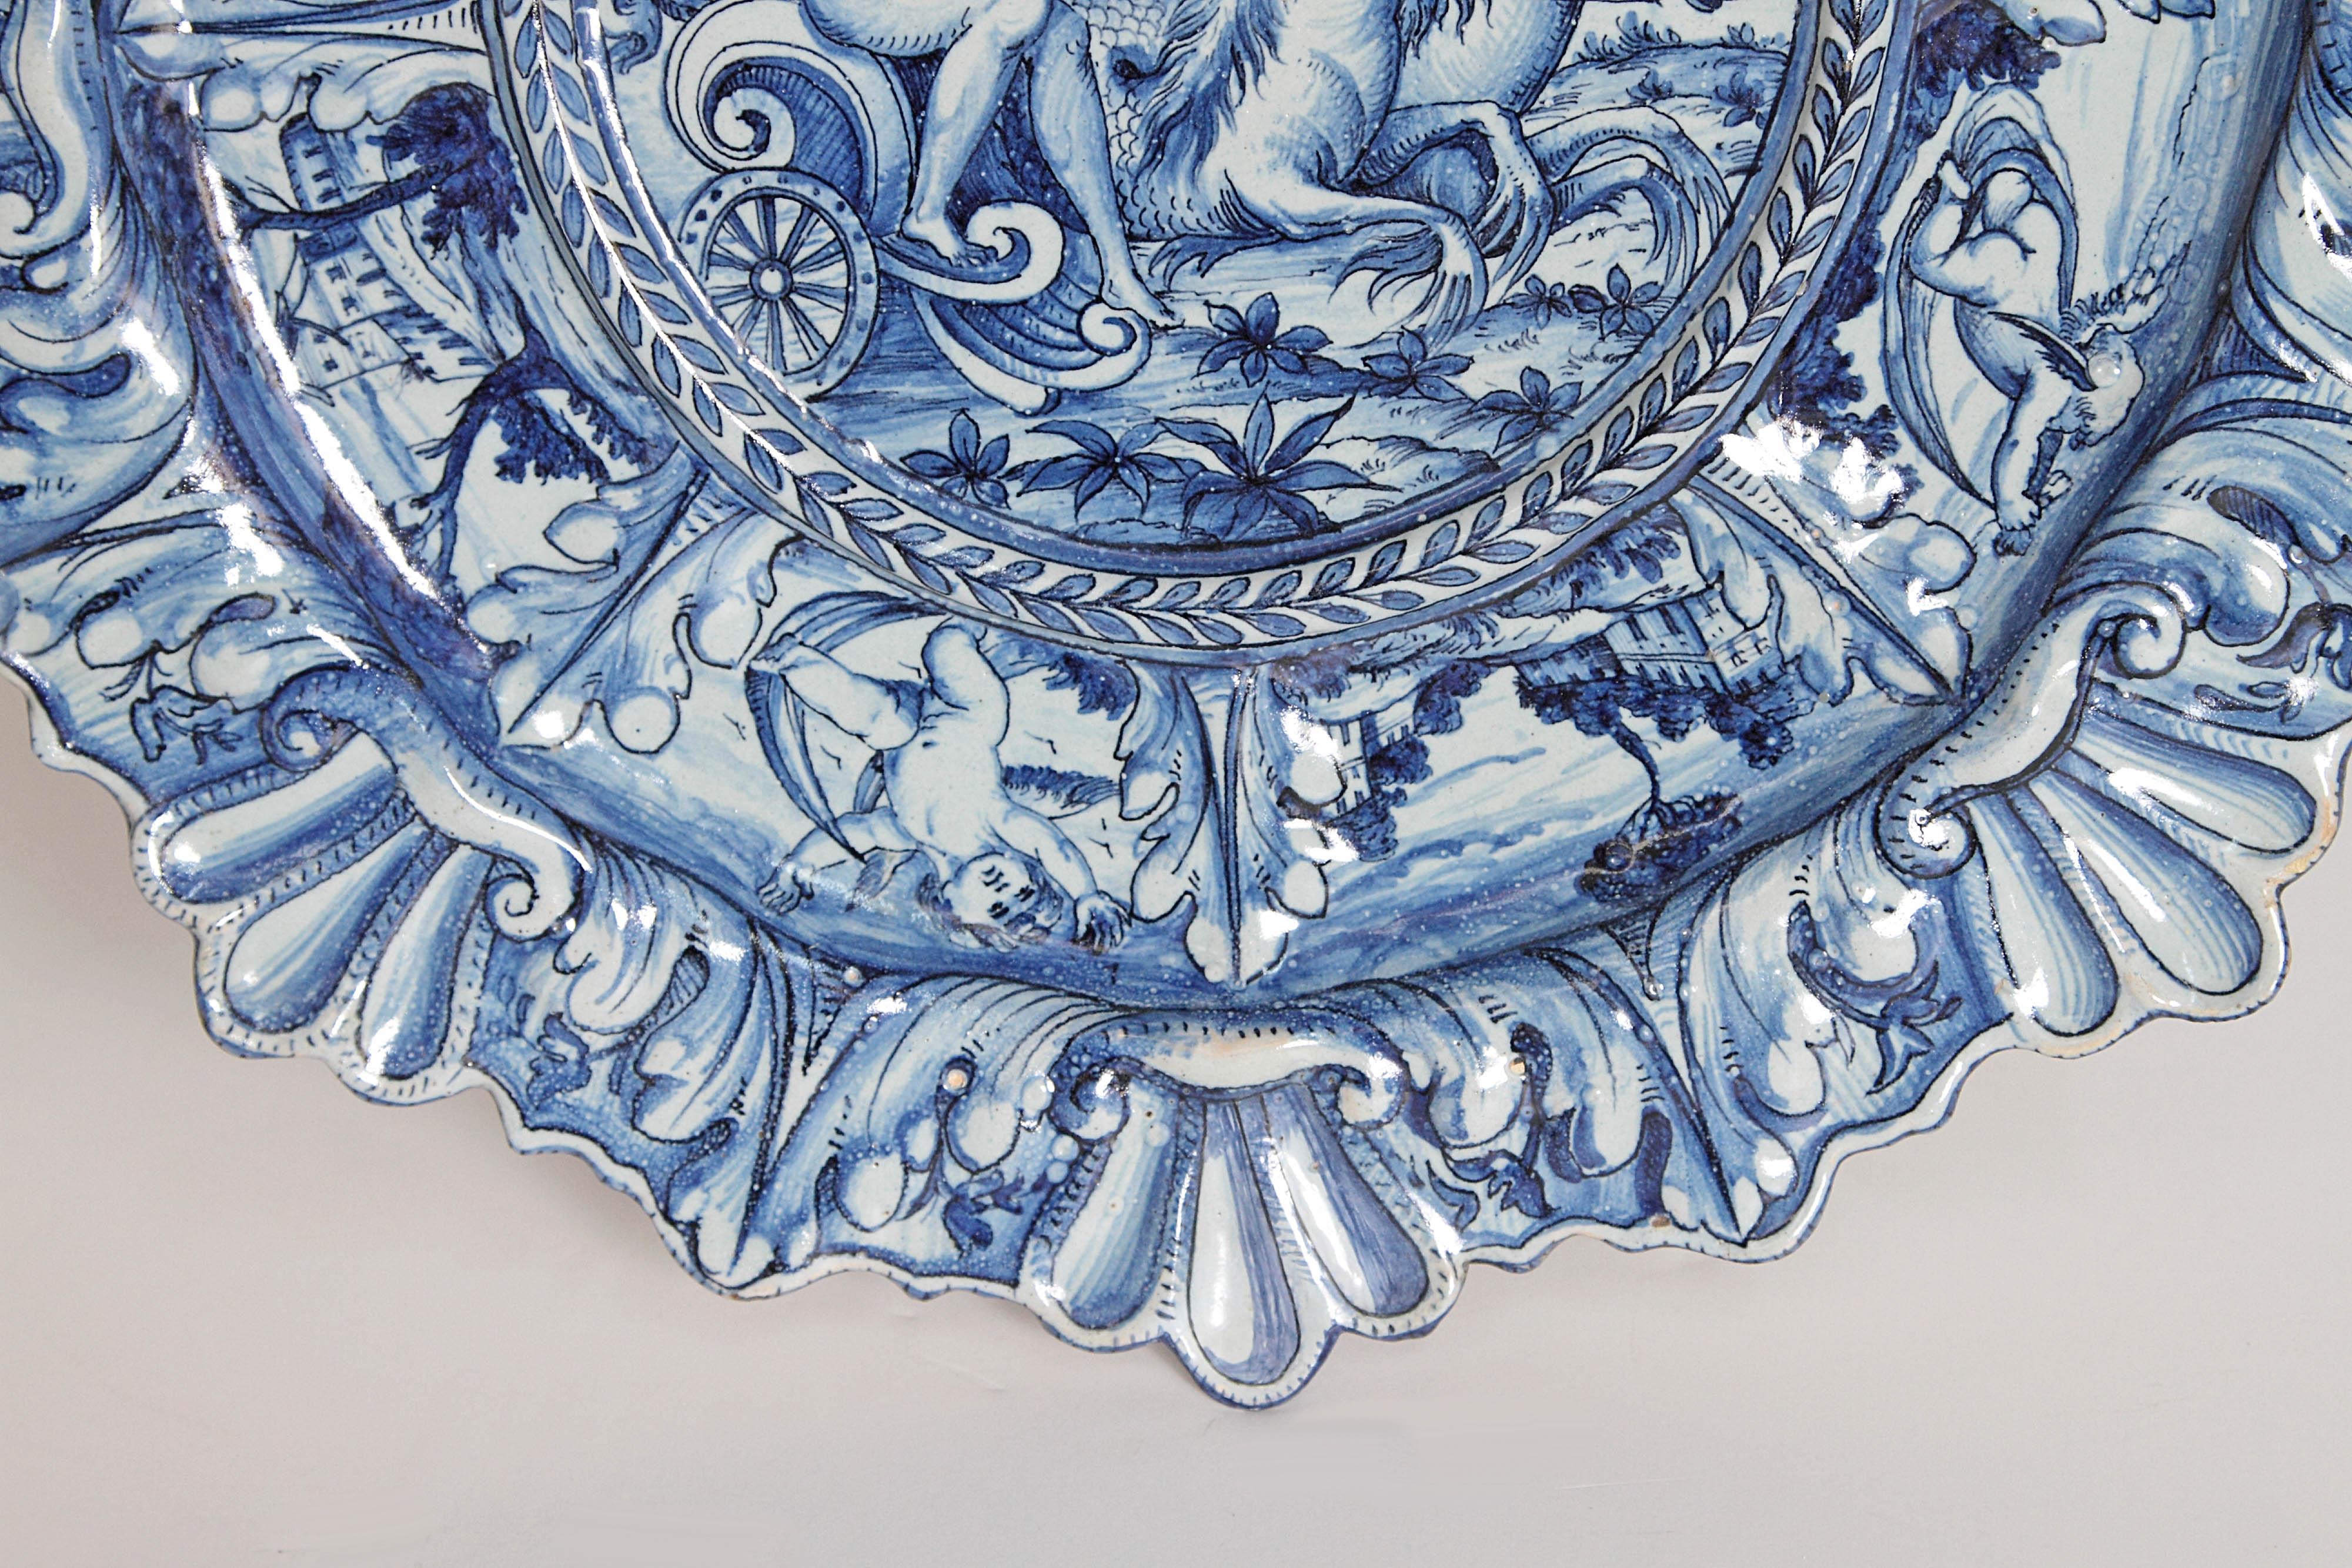 Ceramic Mid-19th Century Blue and White Delft Italian Charger